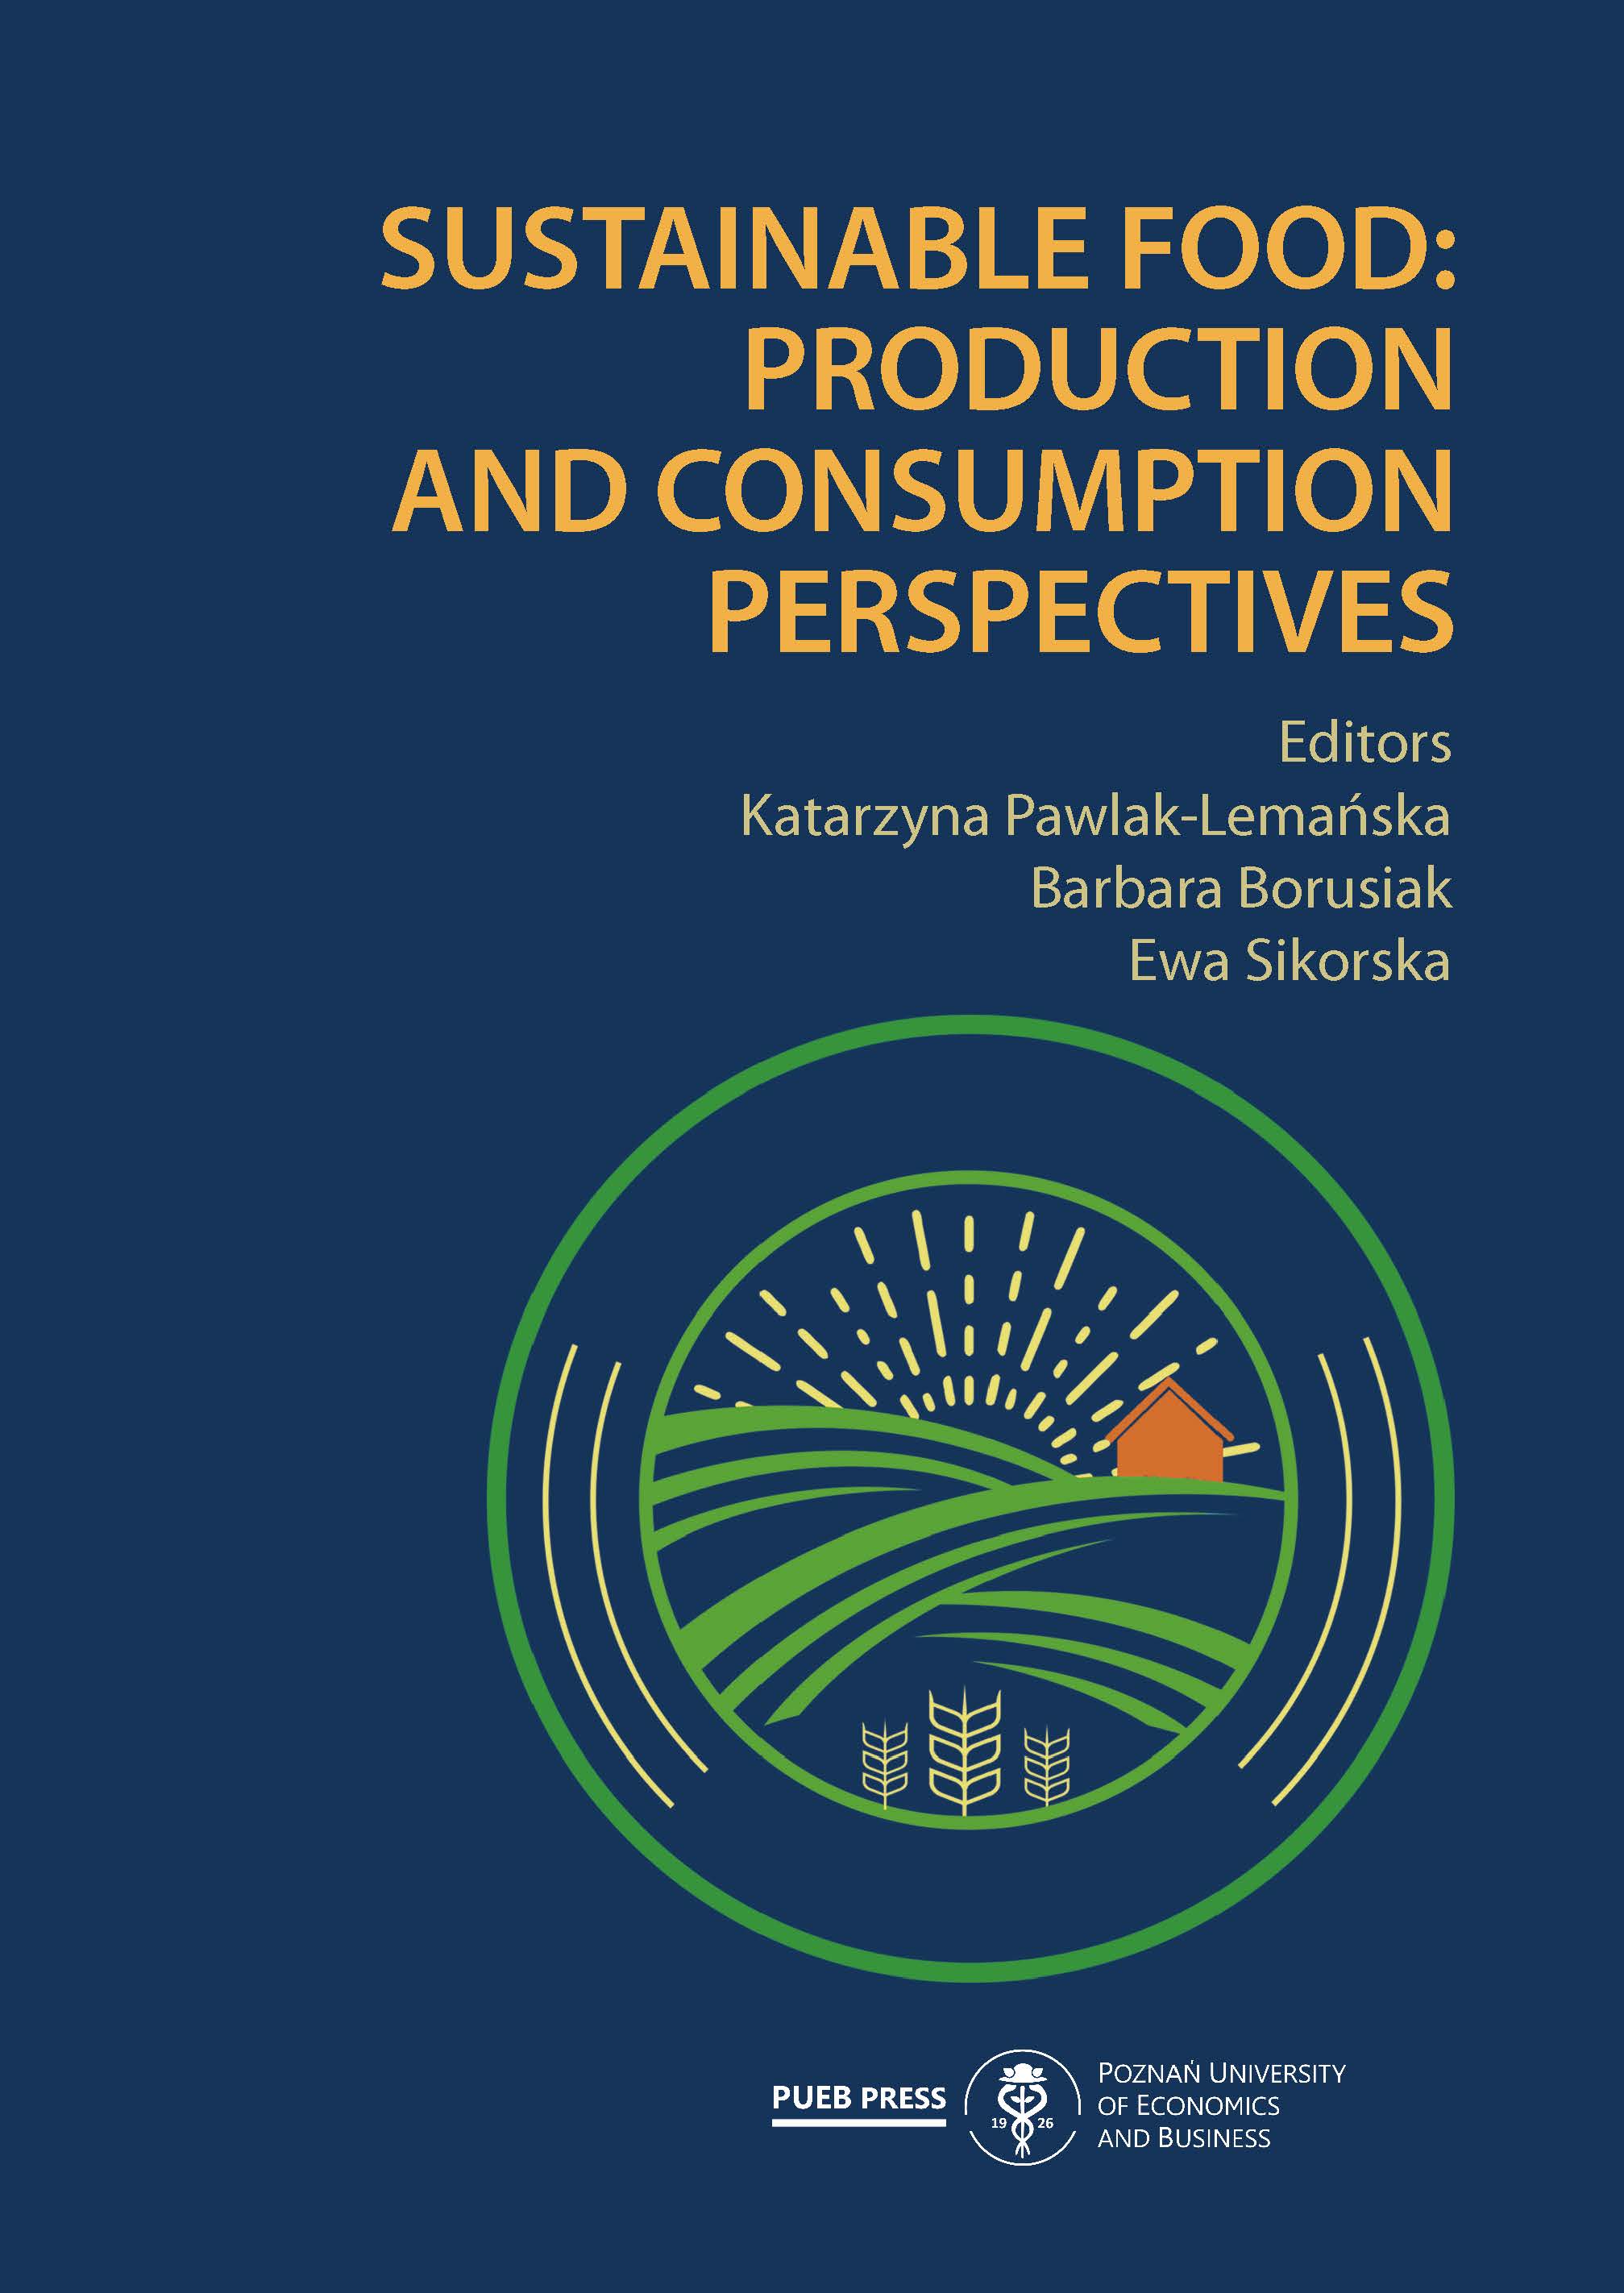 Sustainable food. Production and consumption perspectives